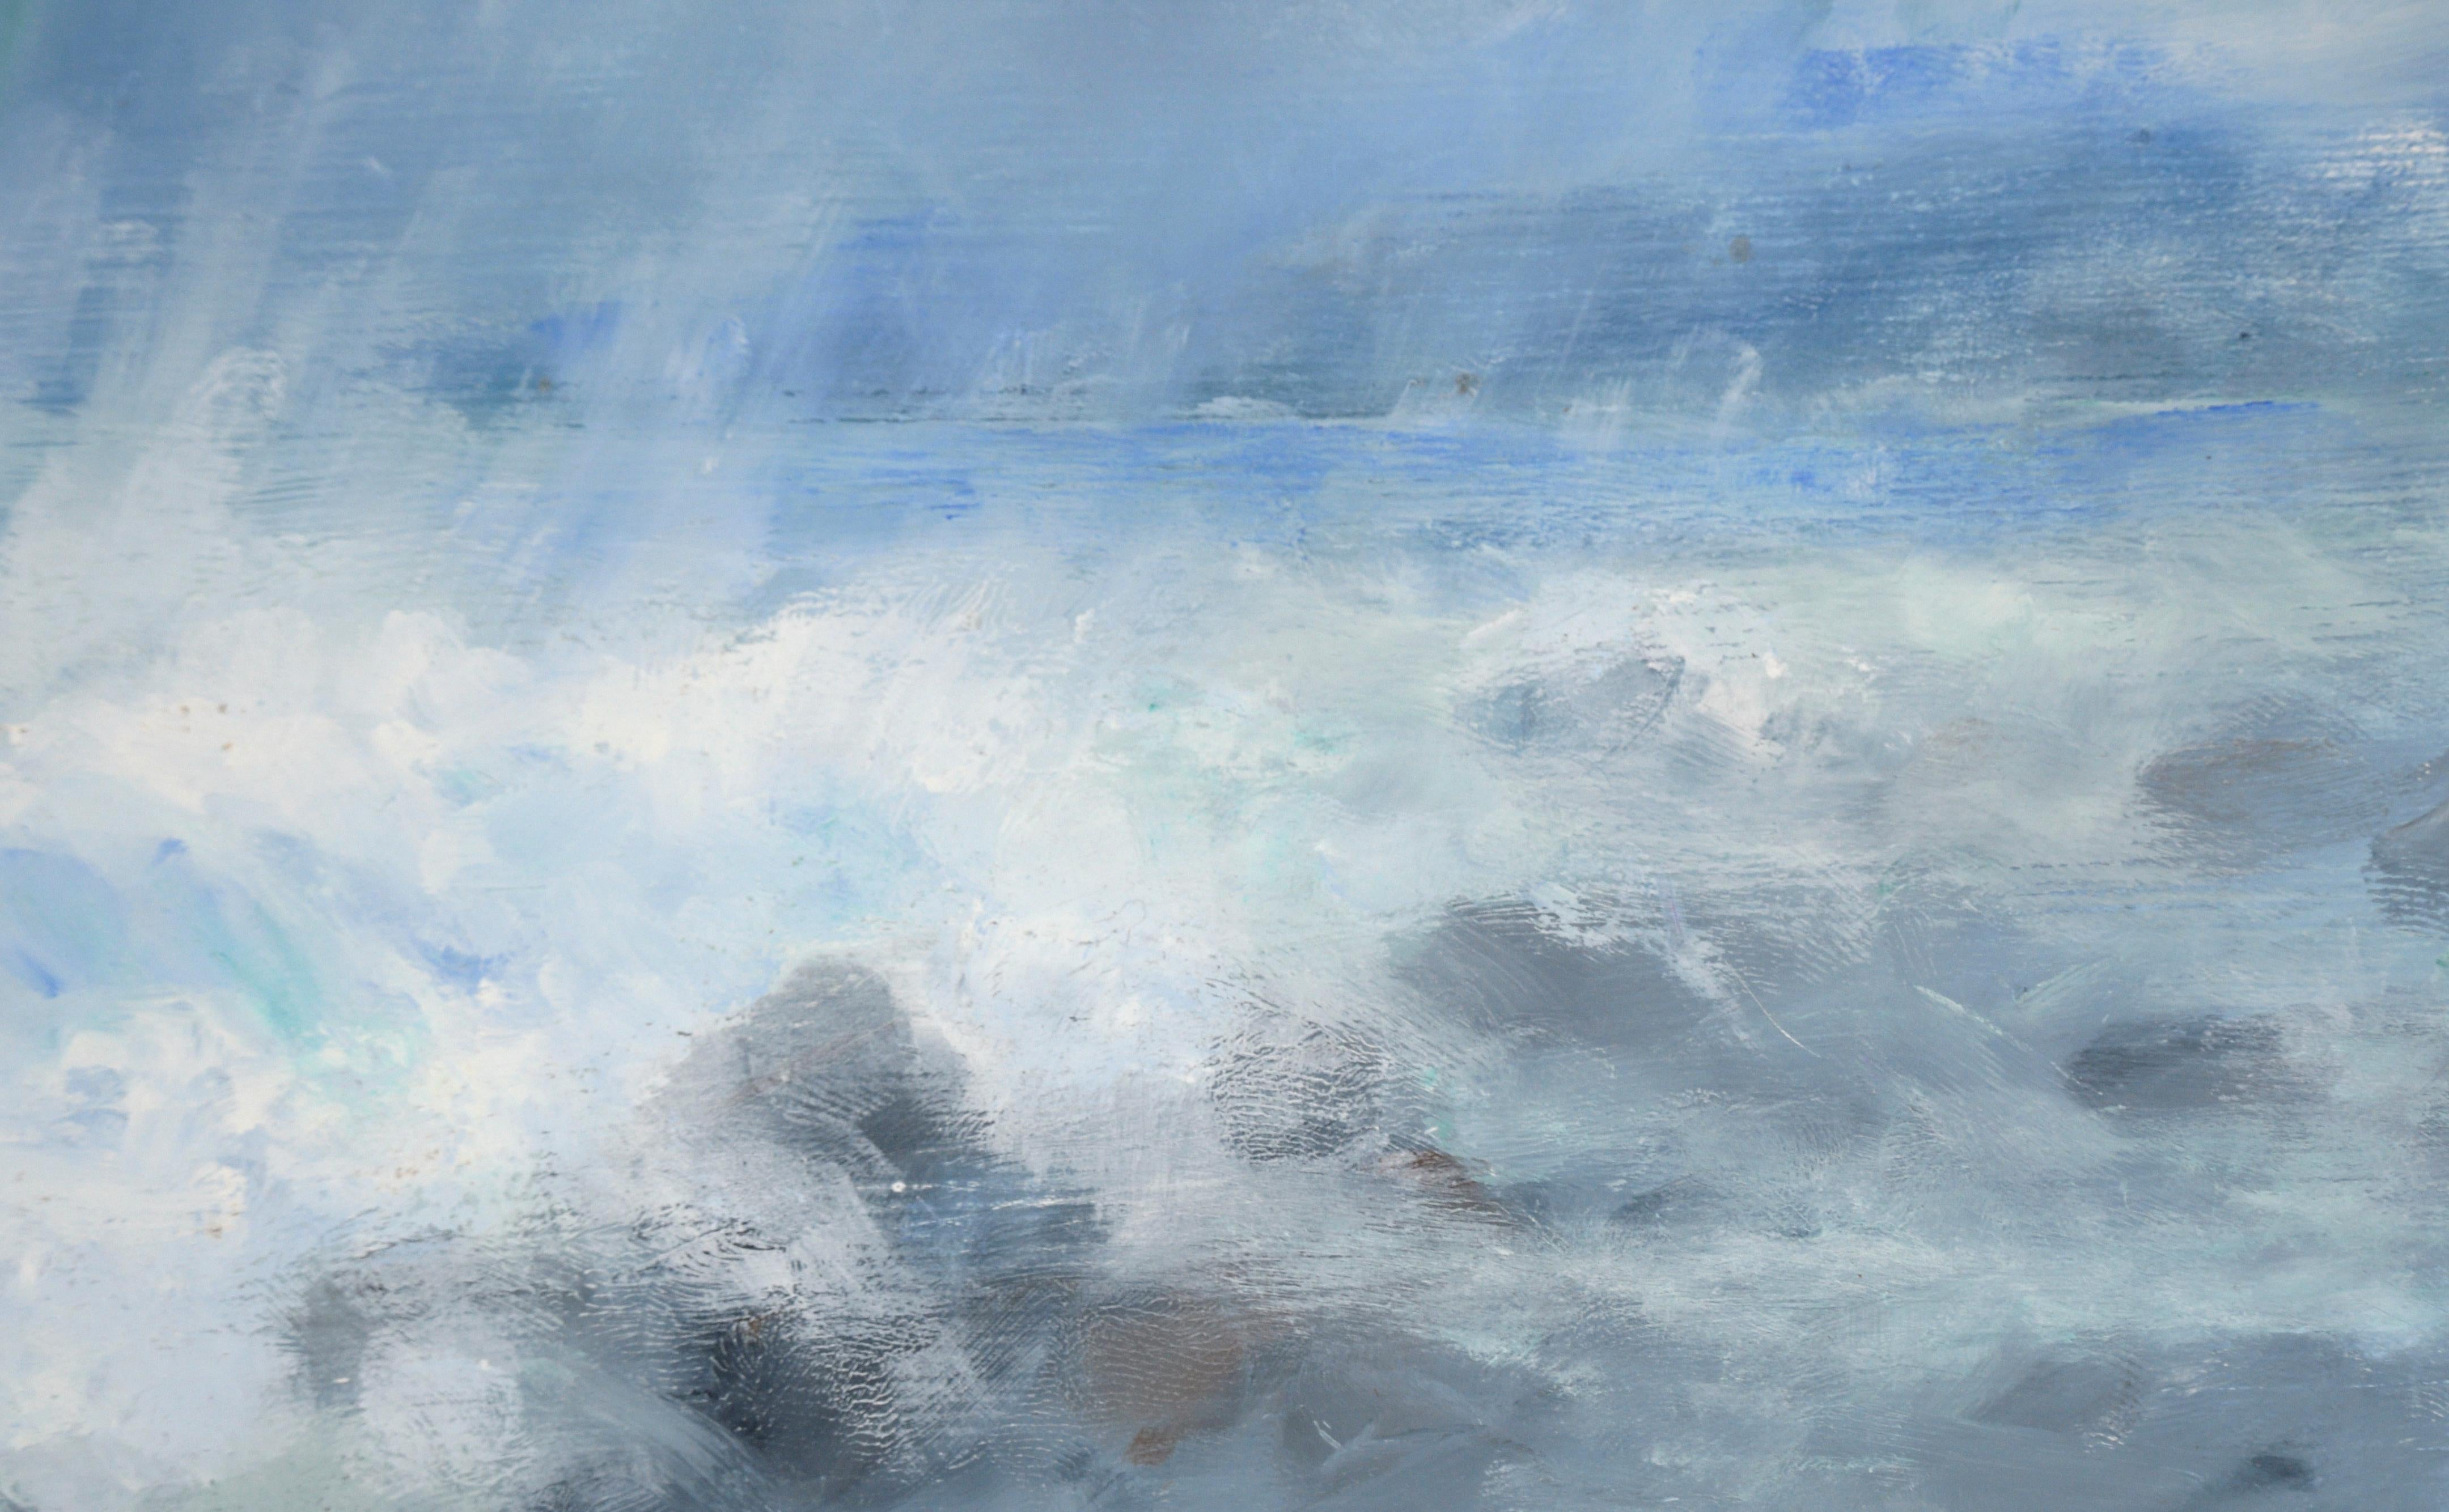 Rain Above the Turbulent Sea by Victor Papkov - Impressionist Painting by Vasil Papkov